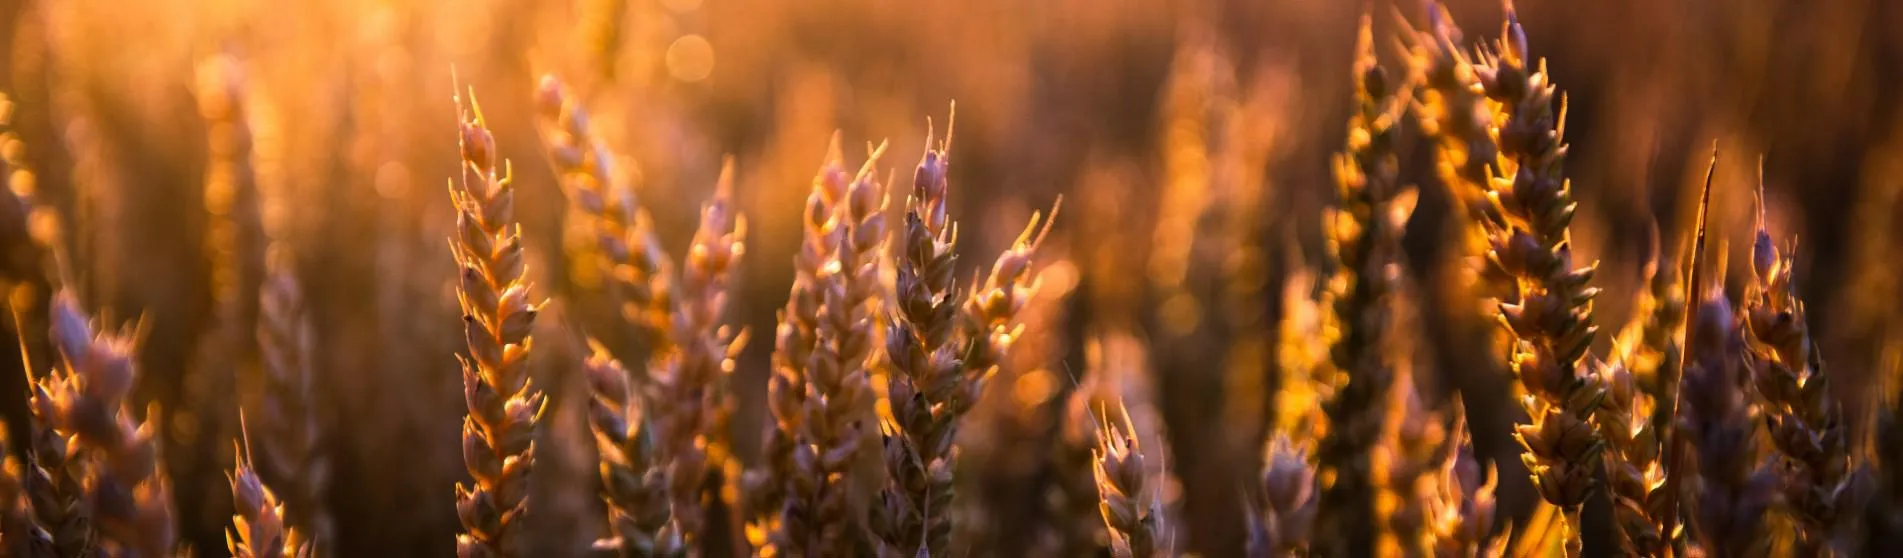 wheat in sunset-by-jacek-dylag-1903x558